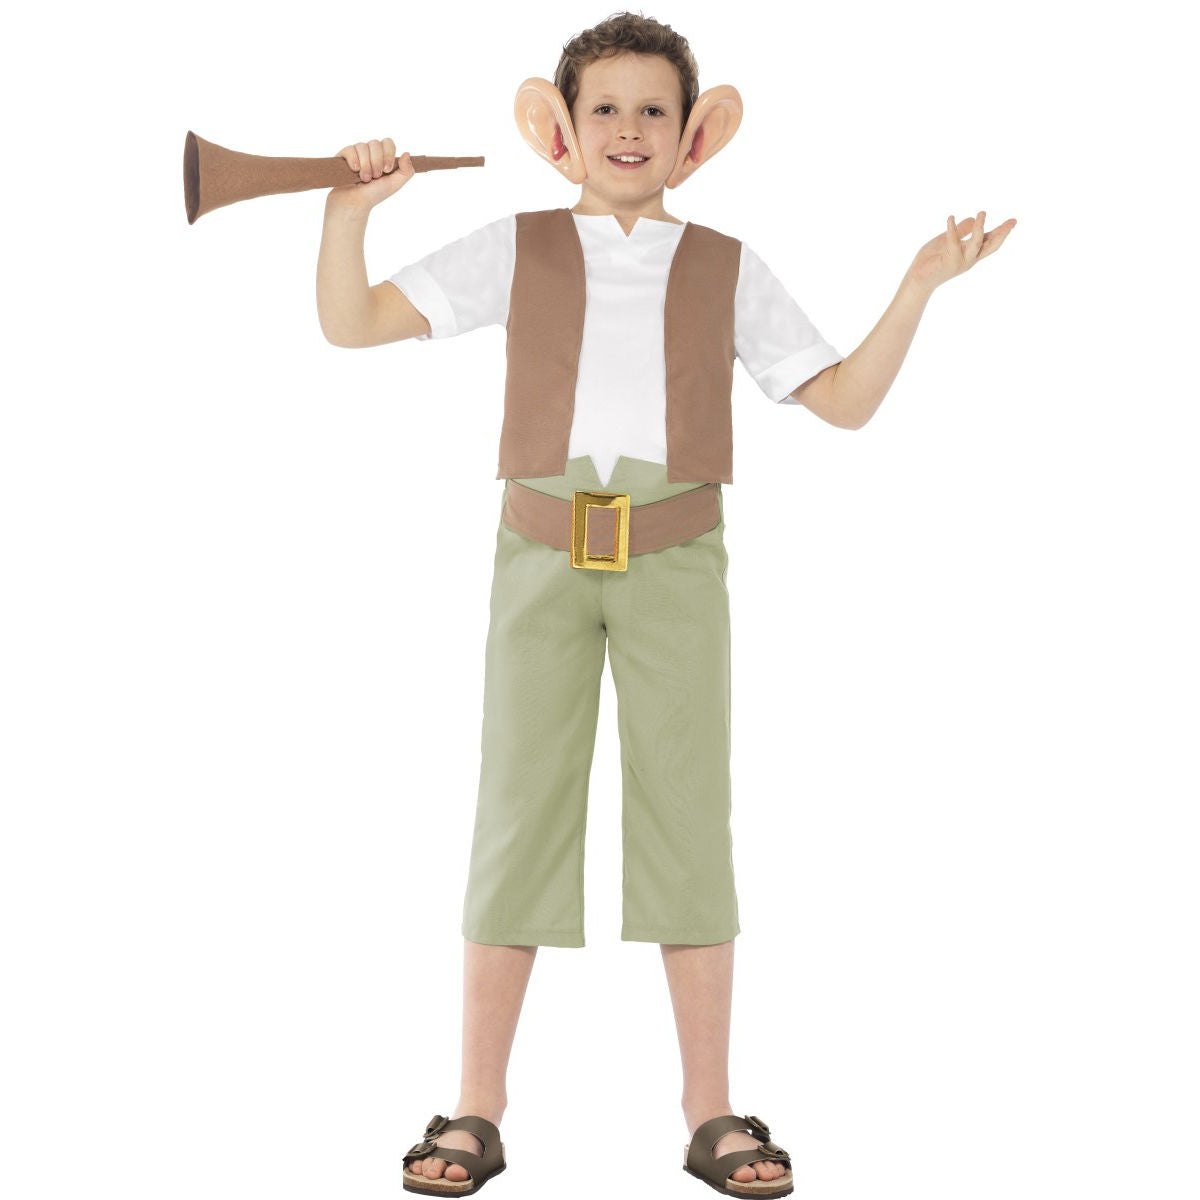 Roald Dahl BFG Children's Costume with large ears and horn